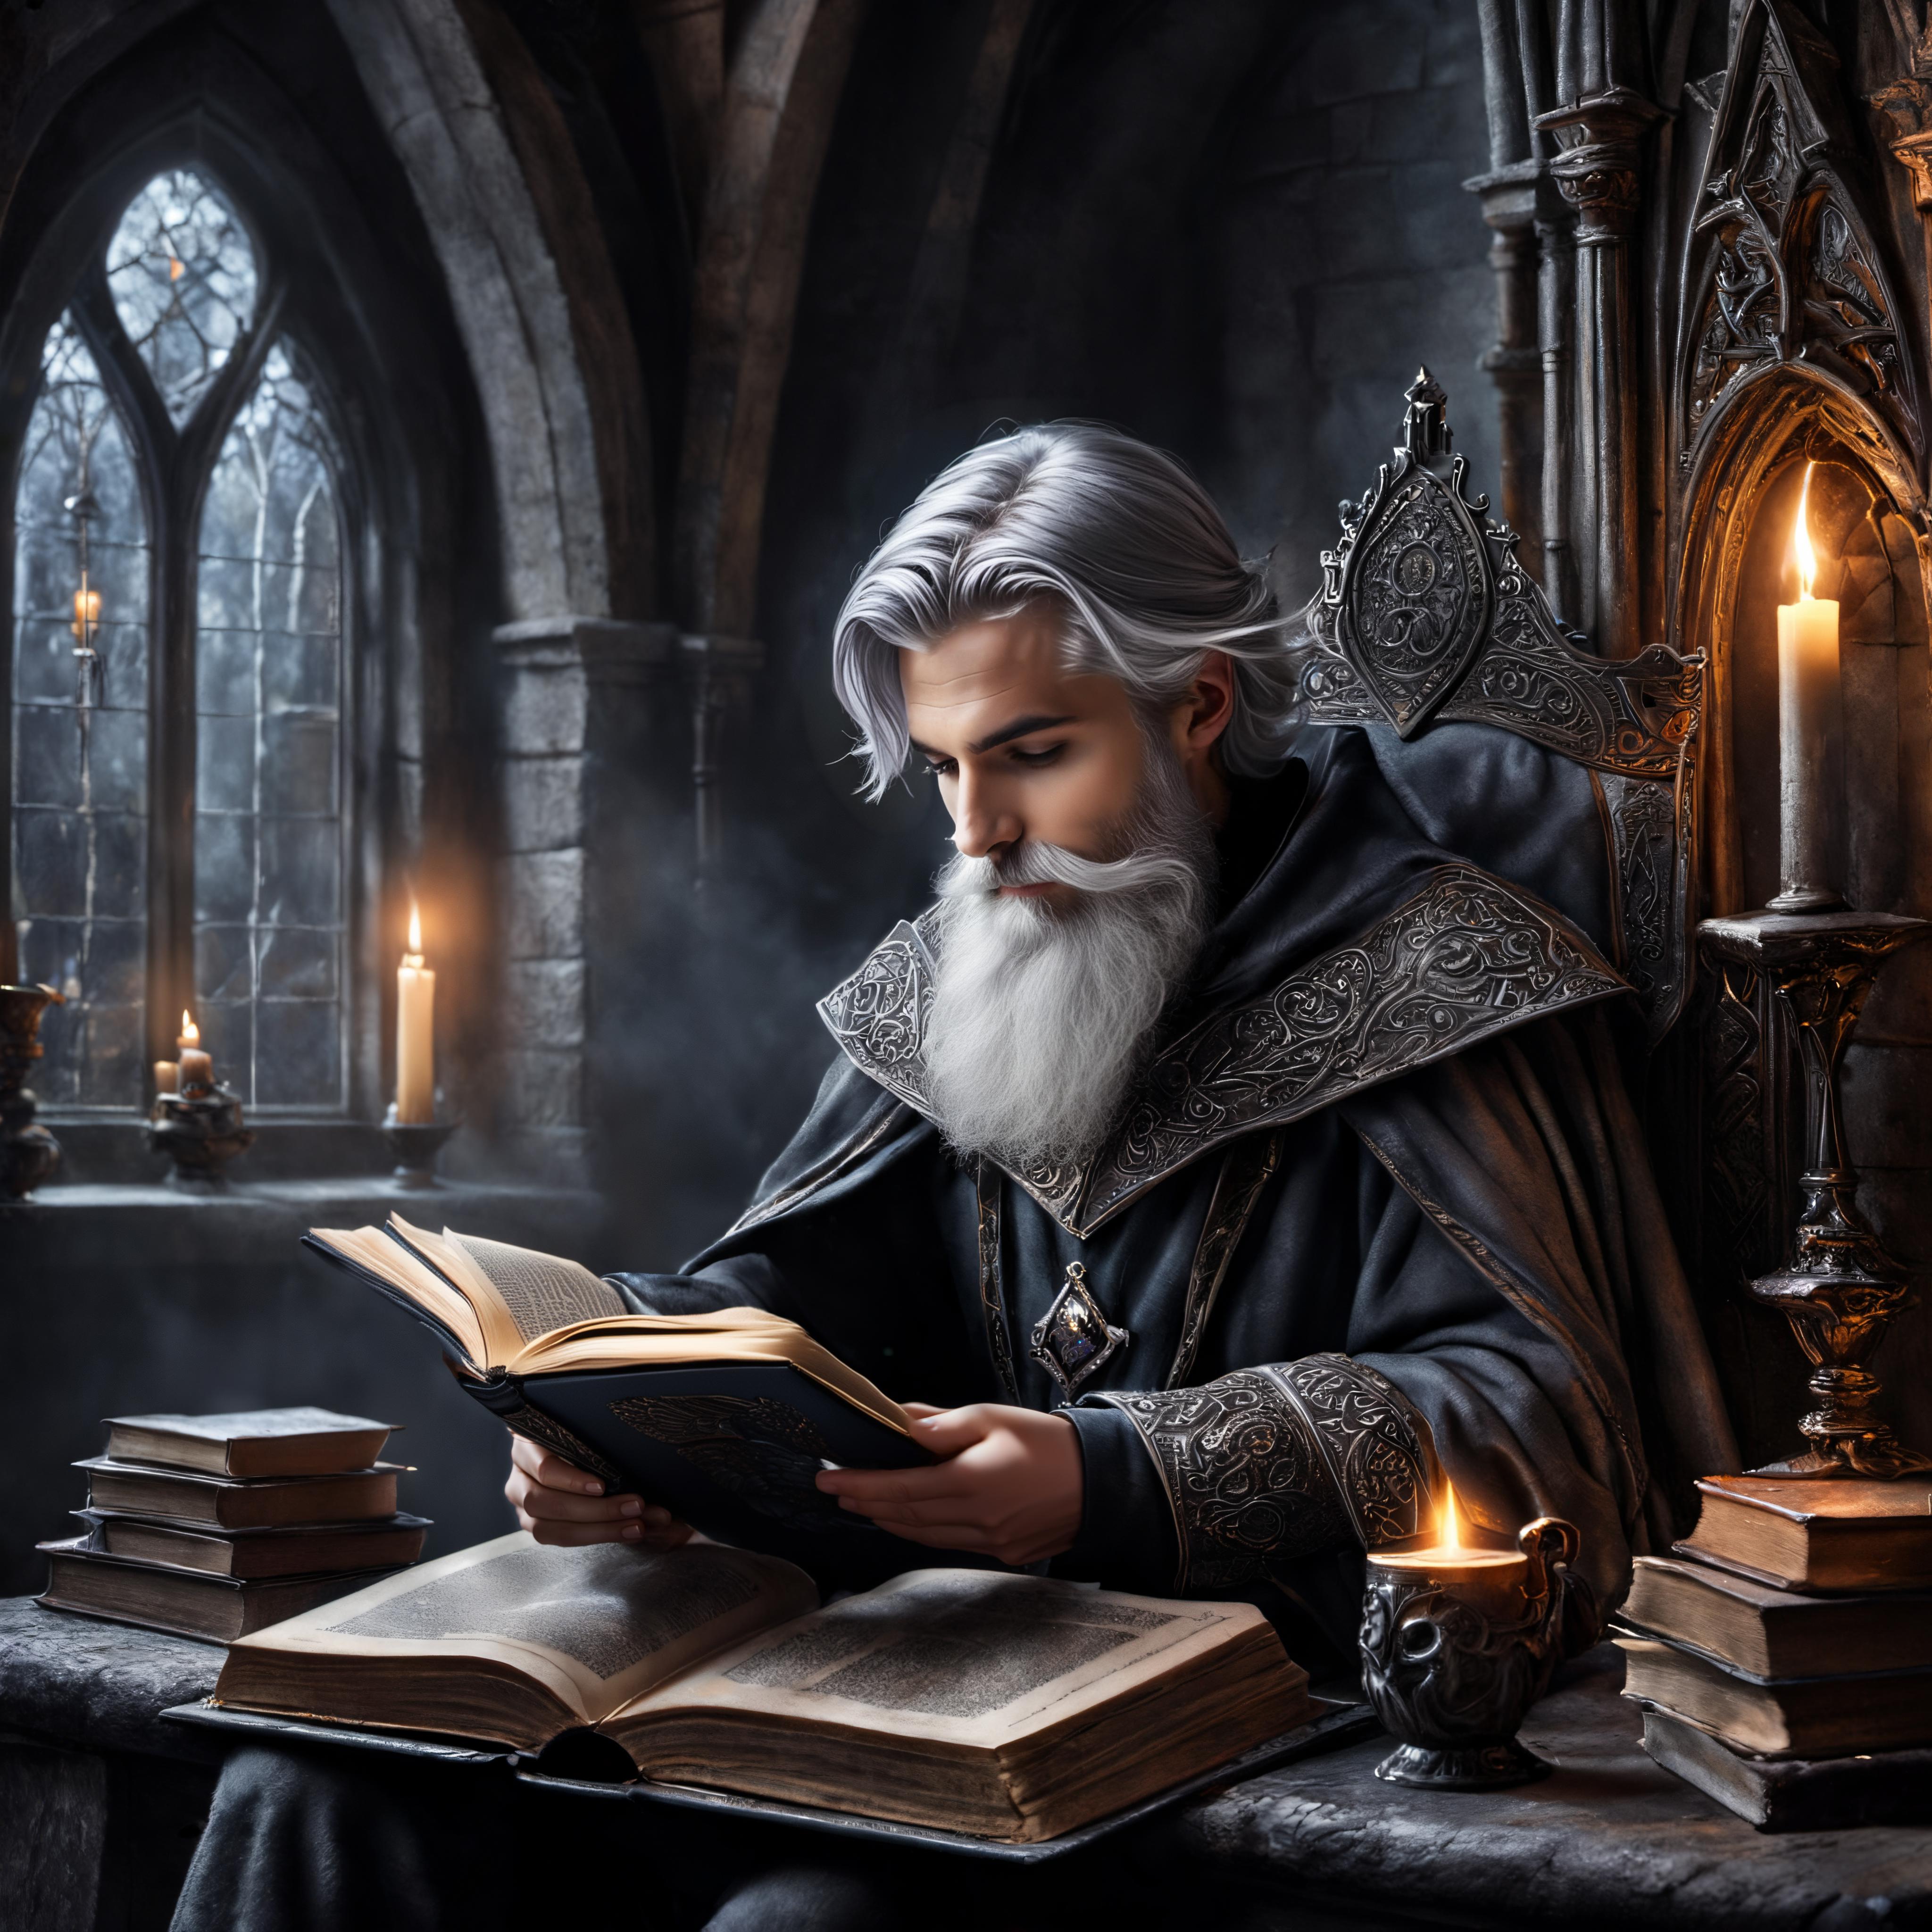 An old man with a beard reads a book in a dark room, surrounded by candles and books.